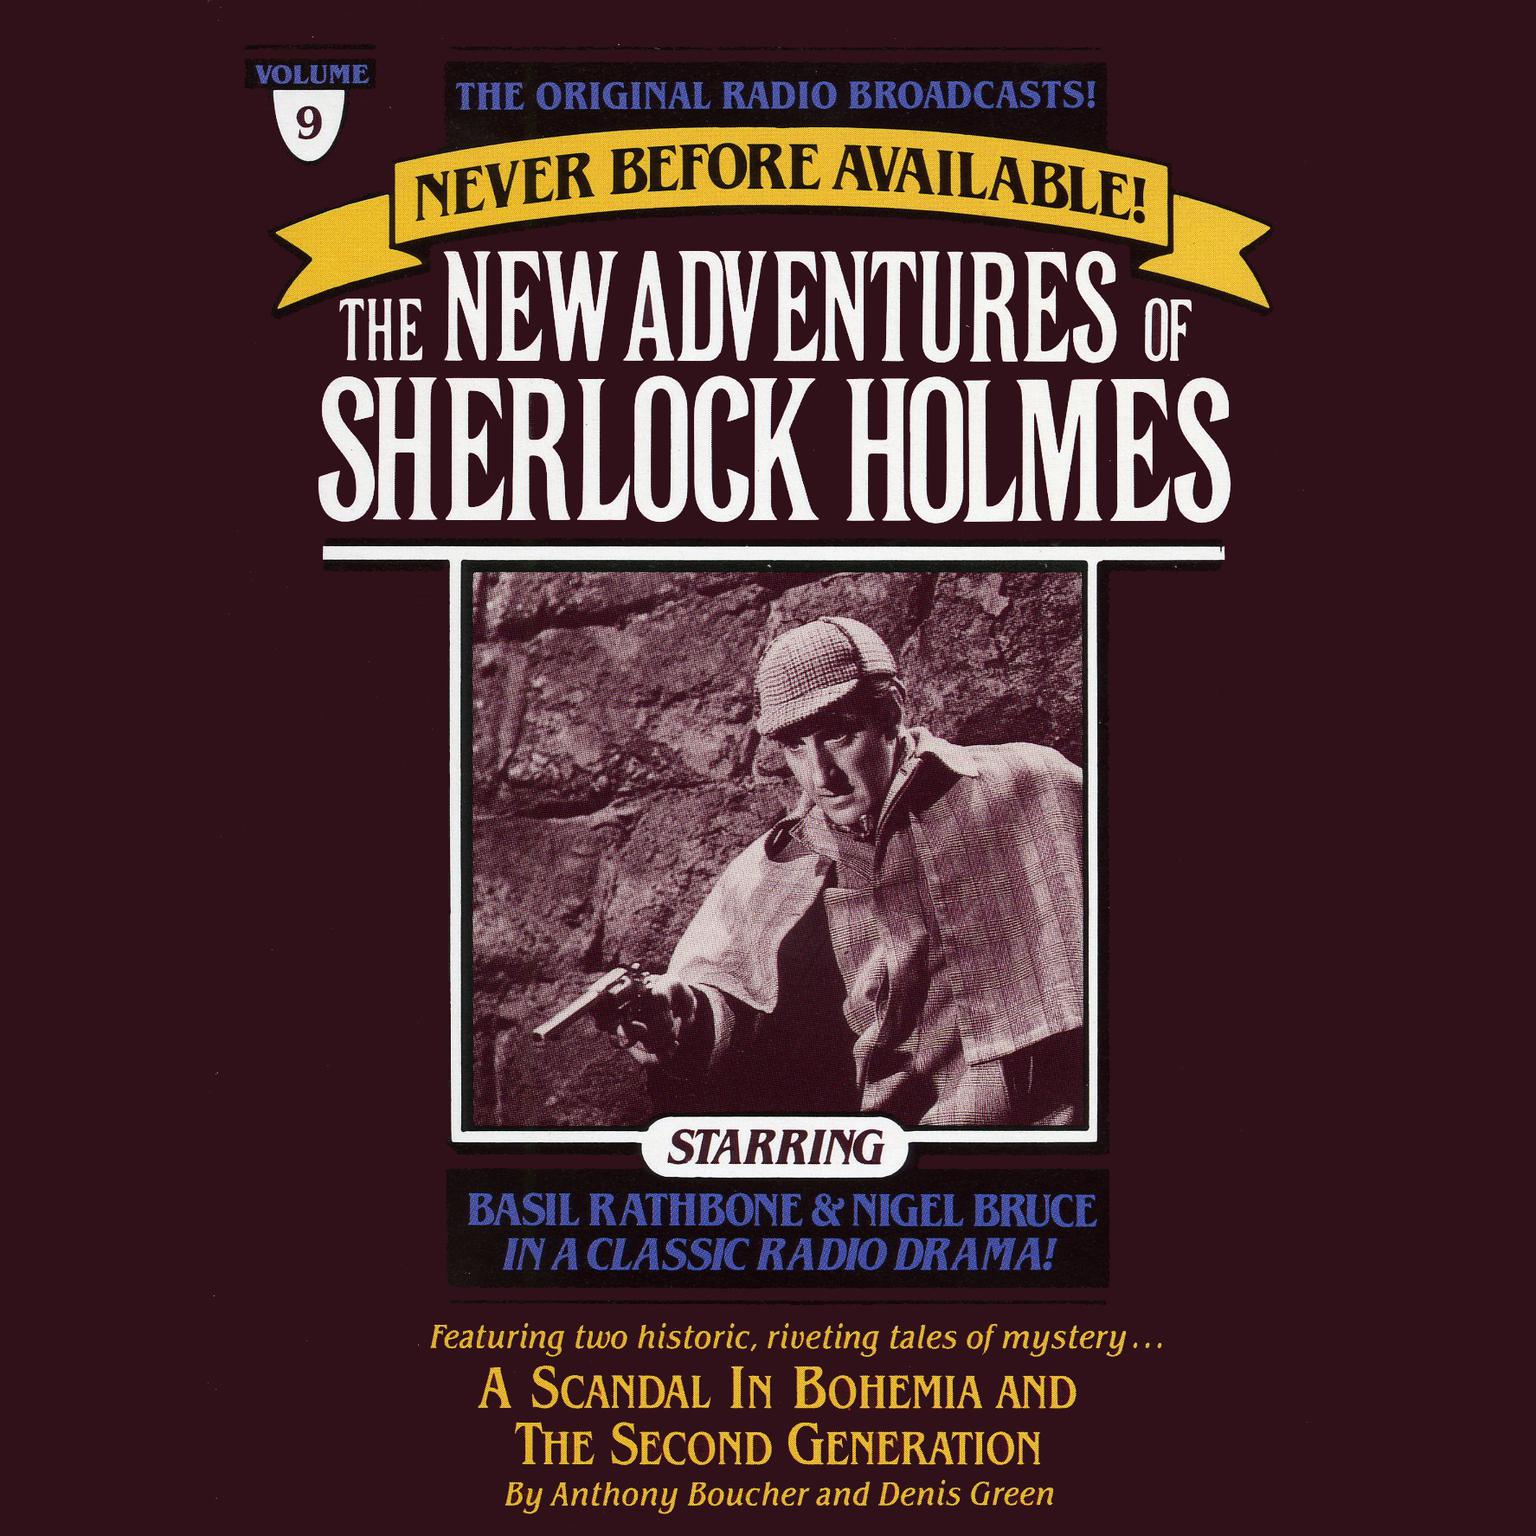 A Scandal in Bohemia and The Second Generation (Abridged): The New Adventures of Sherlock Holmes, Episode 9 Audiobook, by Anthony Boucher